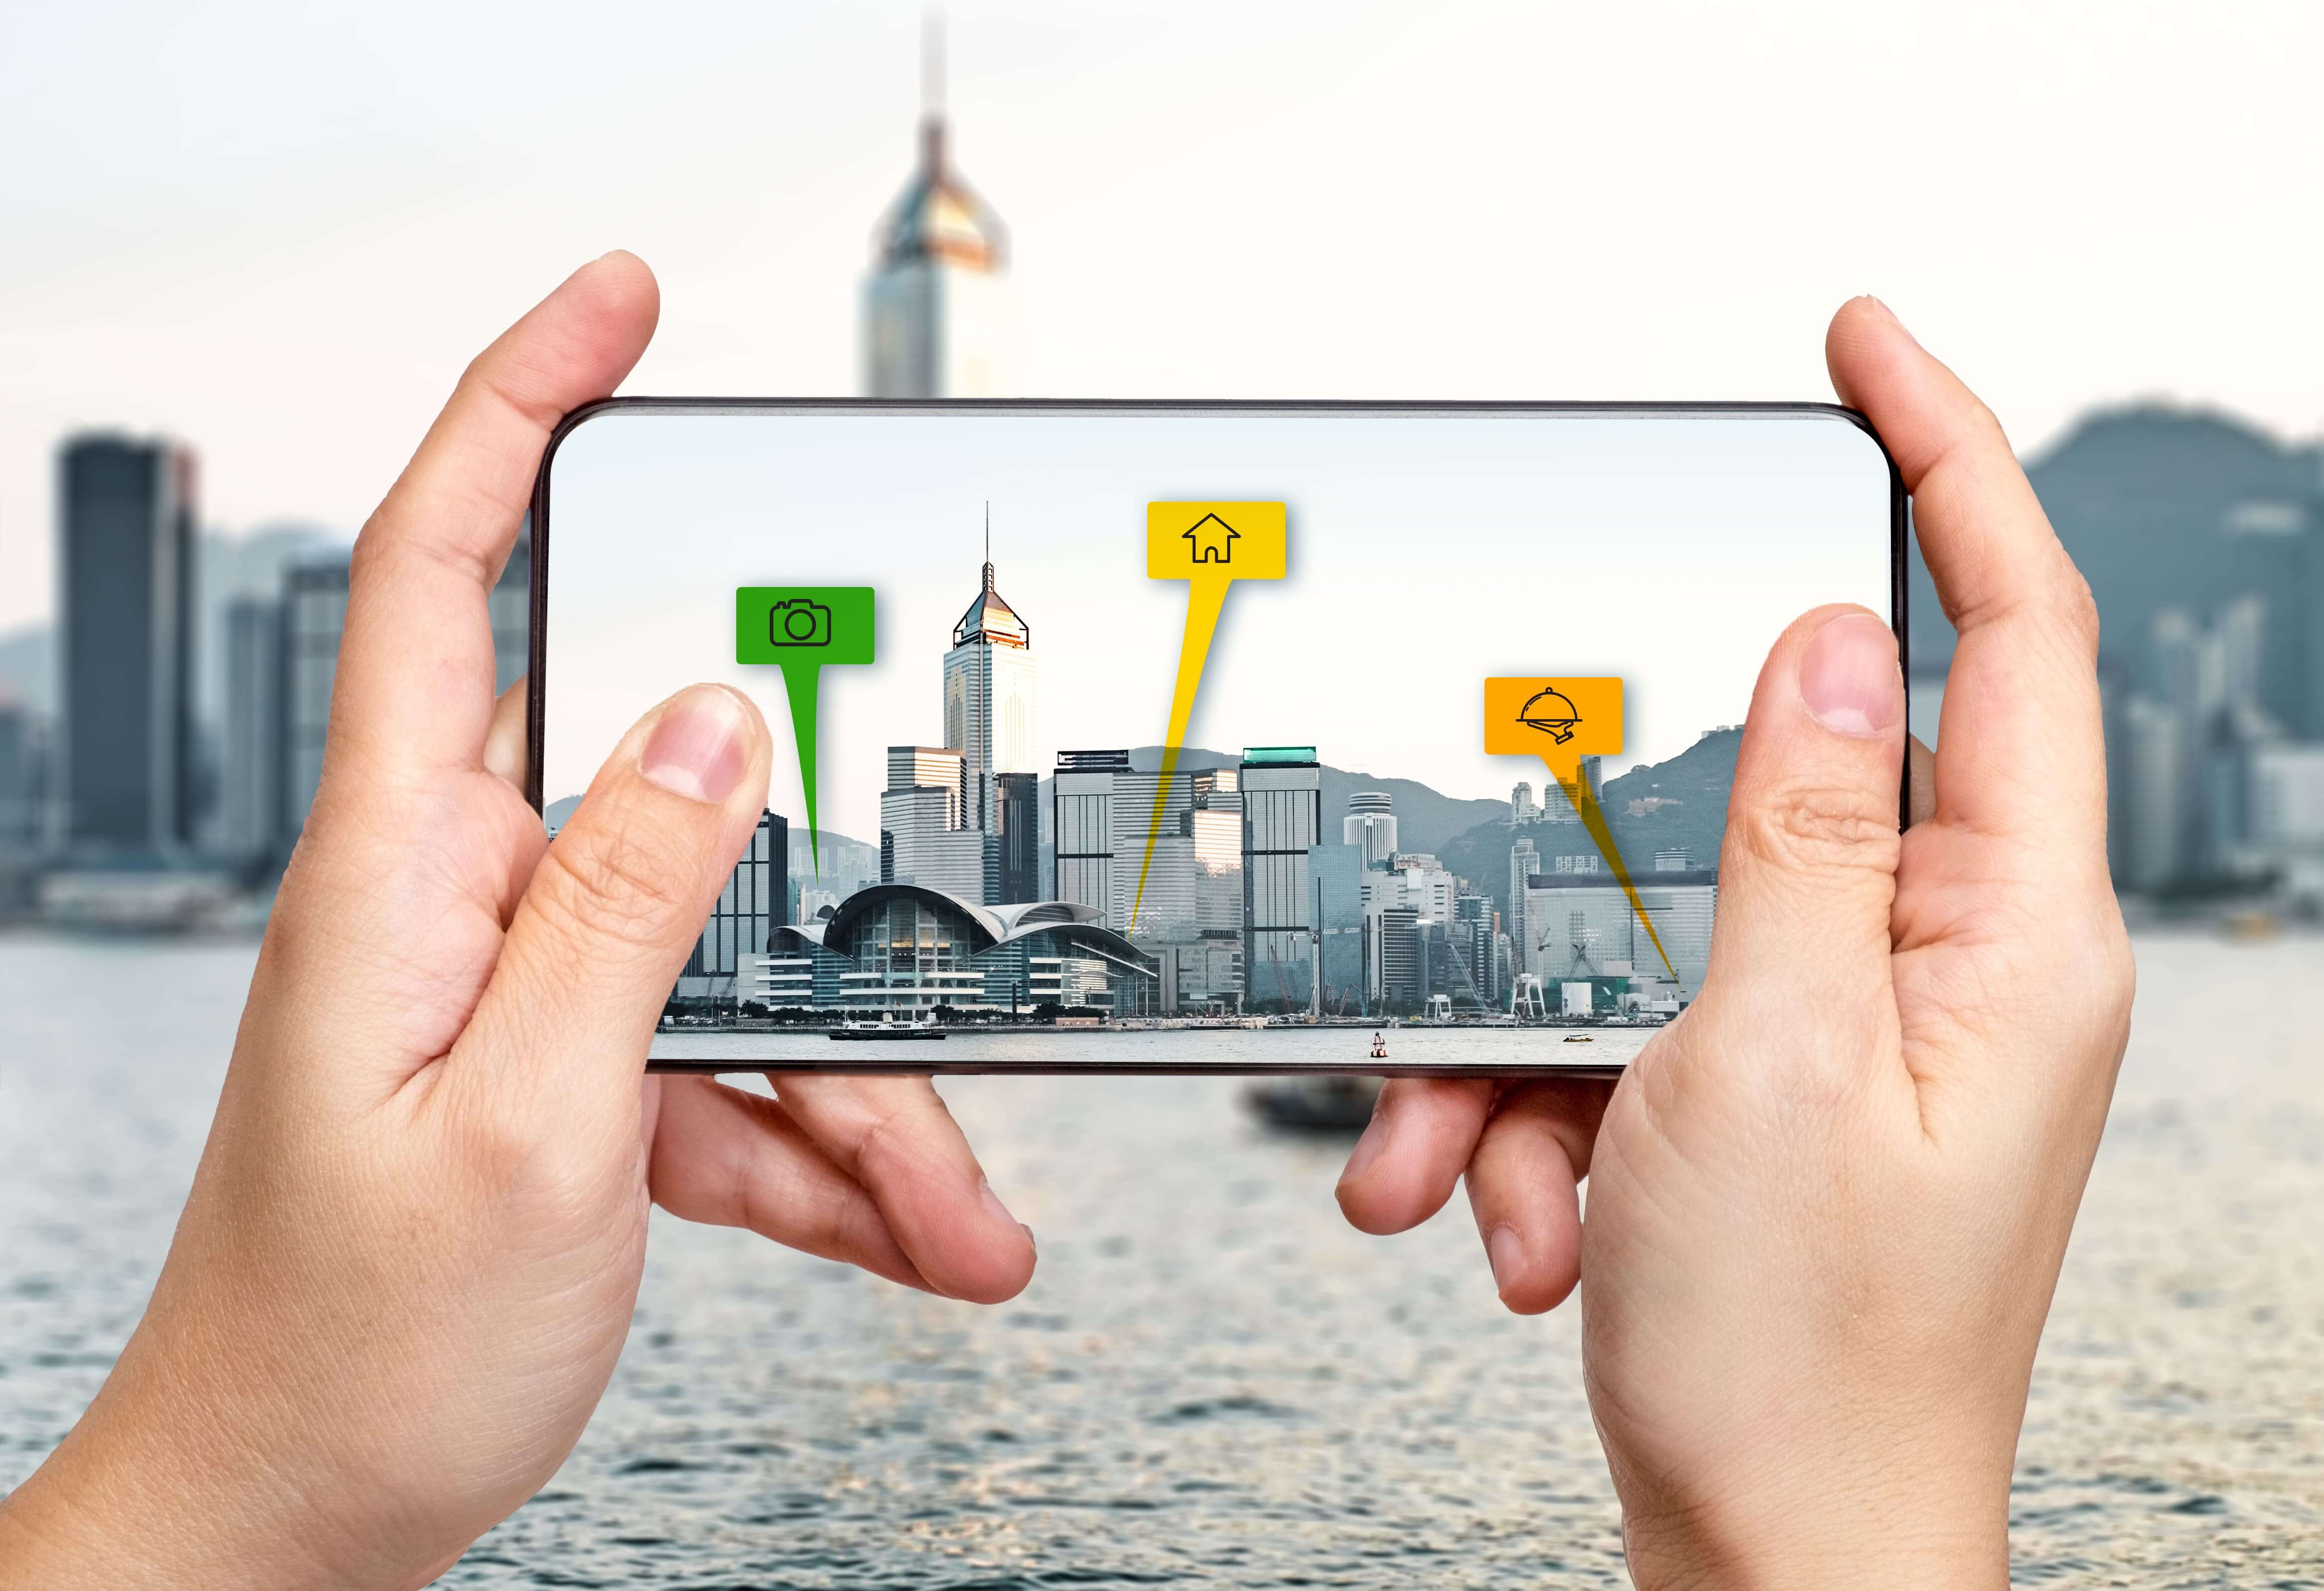 This Is How AR Is Making Travel And Tourism More Convenient For Everyone